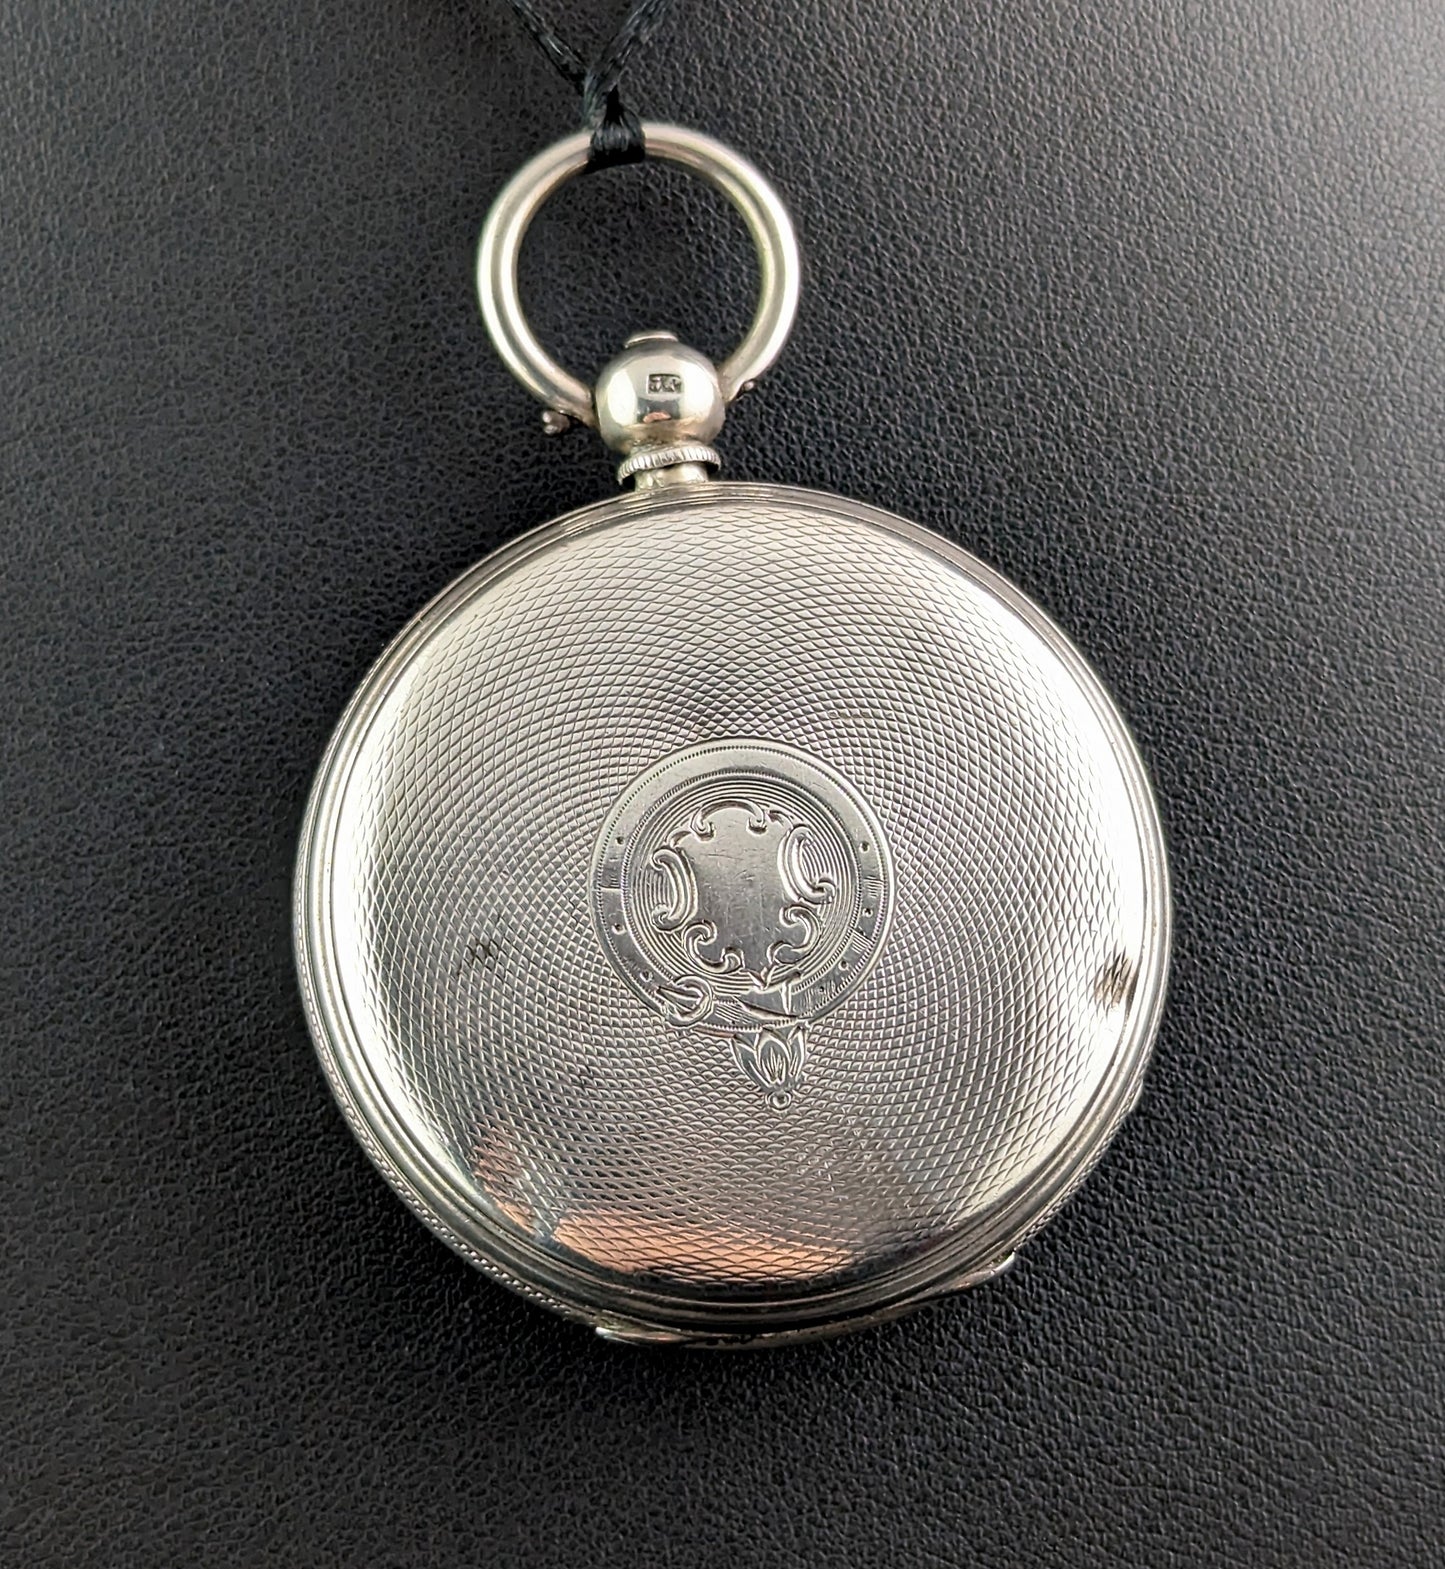 Antique sterling silver pocket watch, mid Victorian